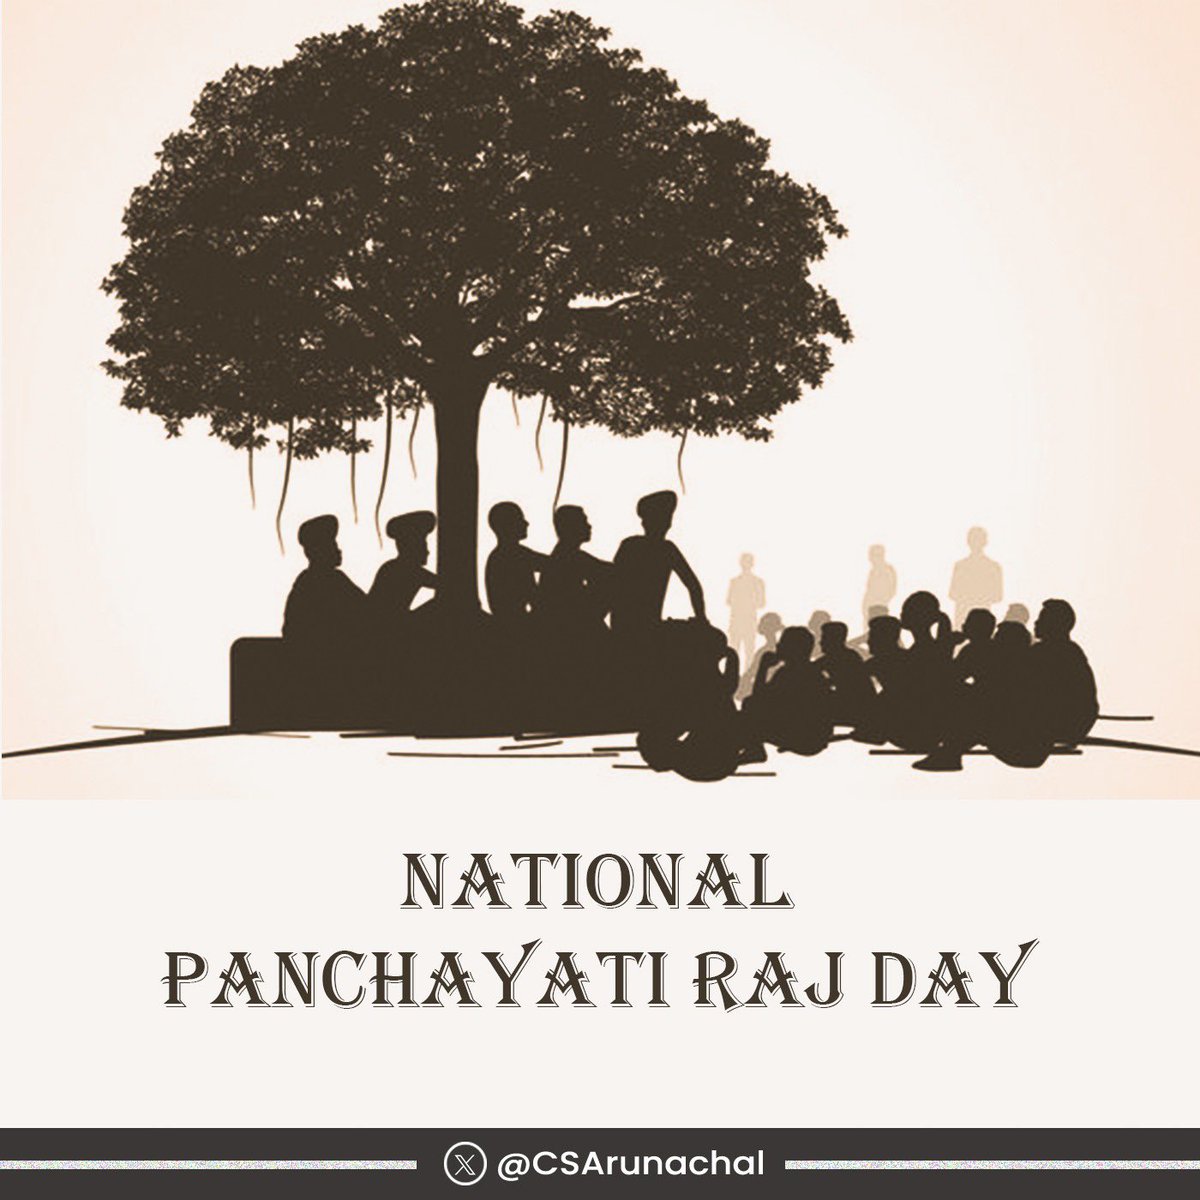 On #NationalPanchayatiRaj Day, let's commemorate the spirit of grassroots democracy and local self-governance that empowers our villages and communities. Panchayats are instrumental in rural development, fostering inclusive growth and participatory decision-making. Today, let's